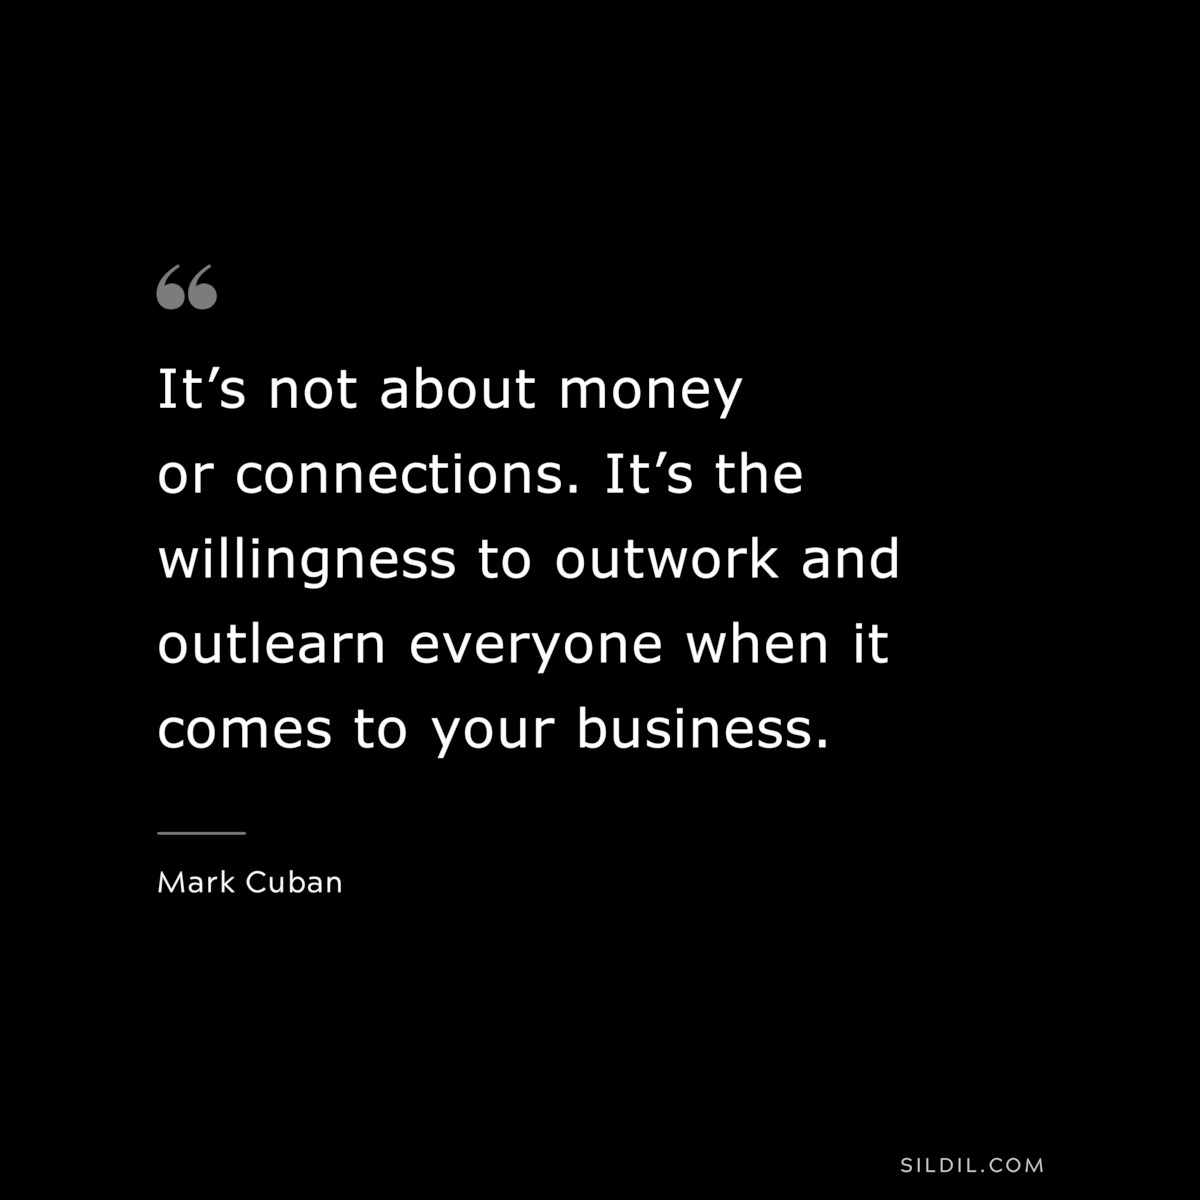 It’s not about money or connections. It’s the willingness to outwork and outlearn everyone when it comes to your business. ― Mark Cuban